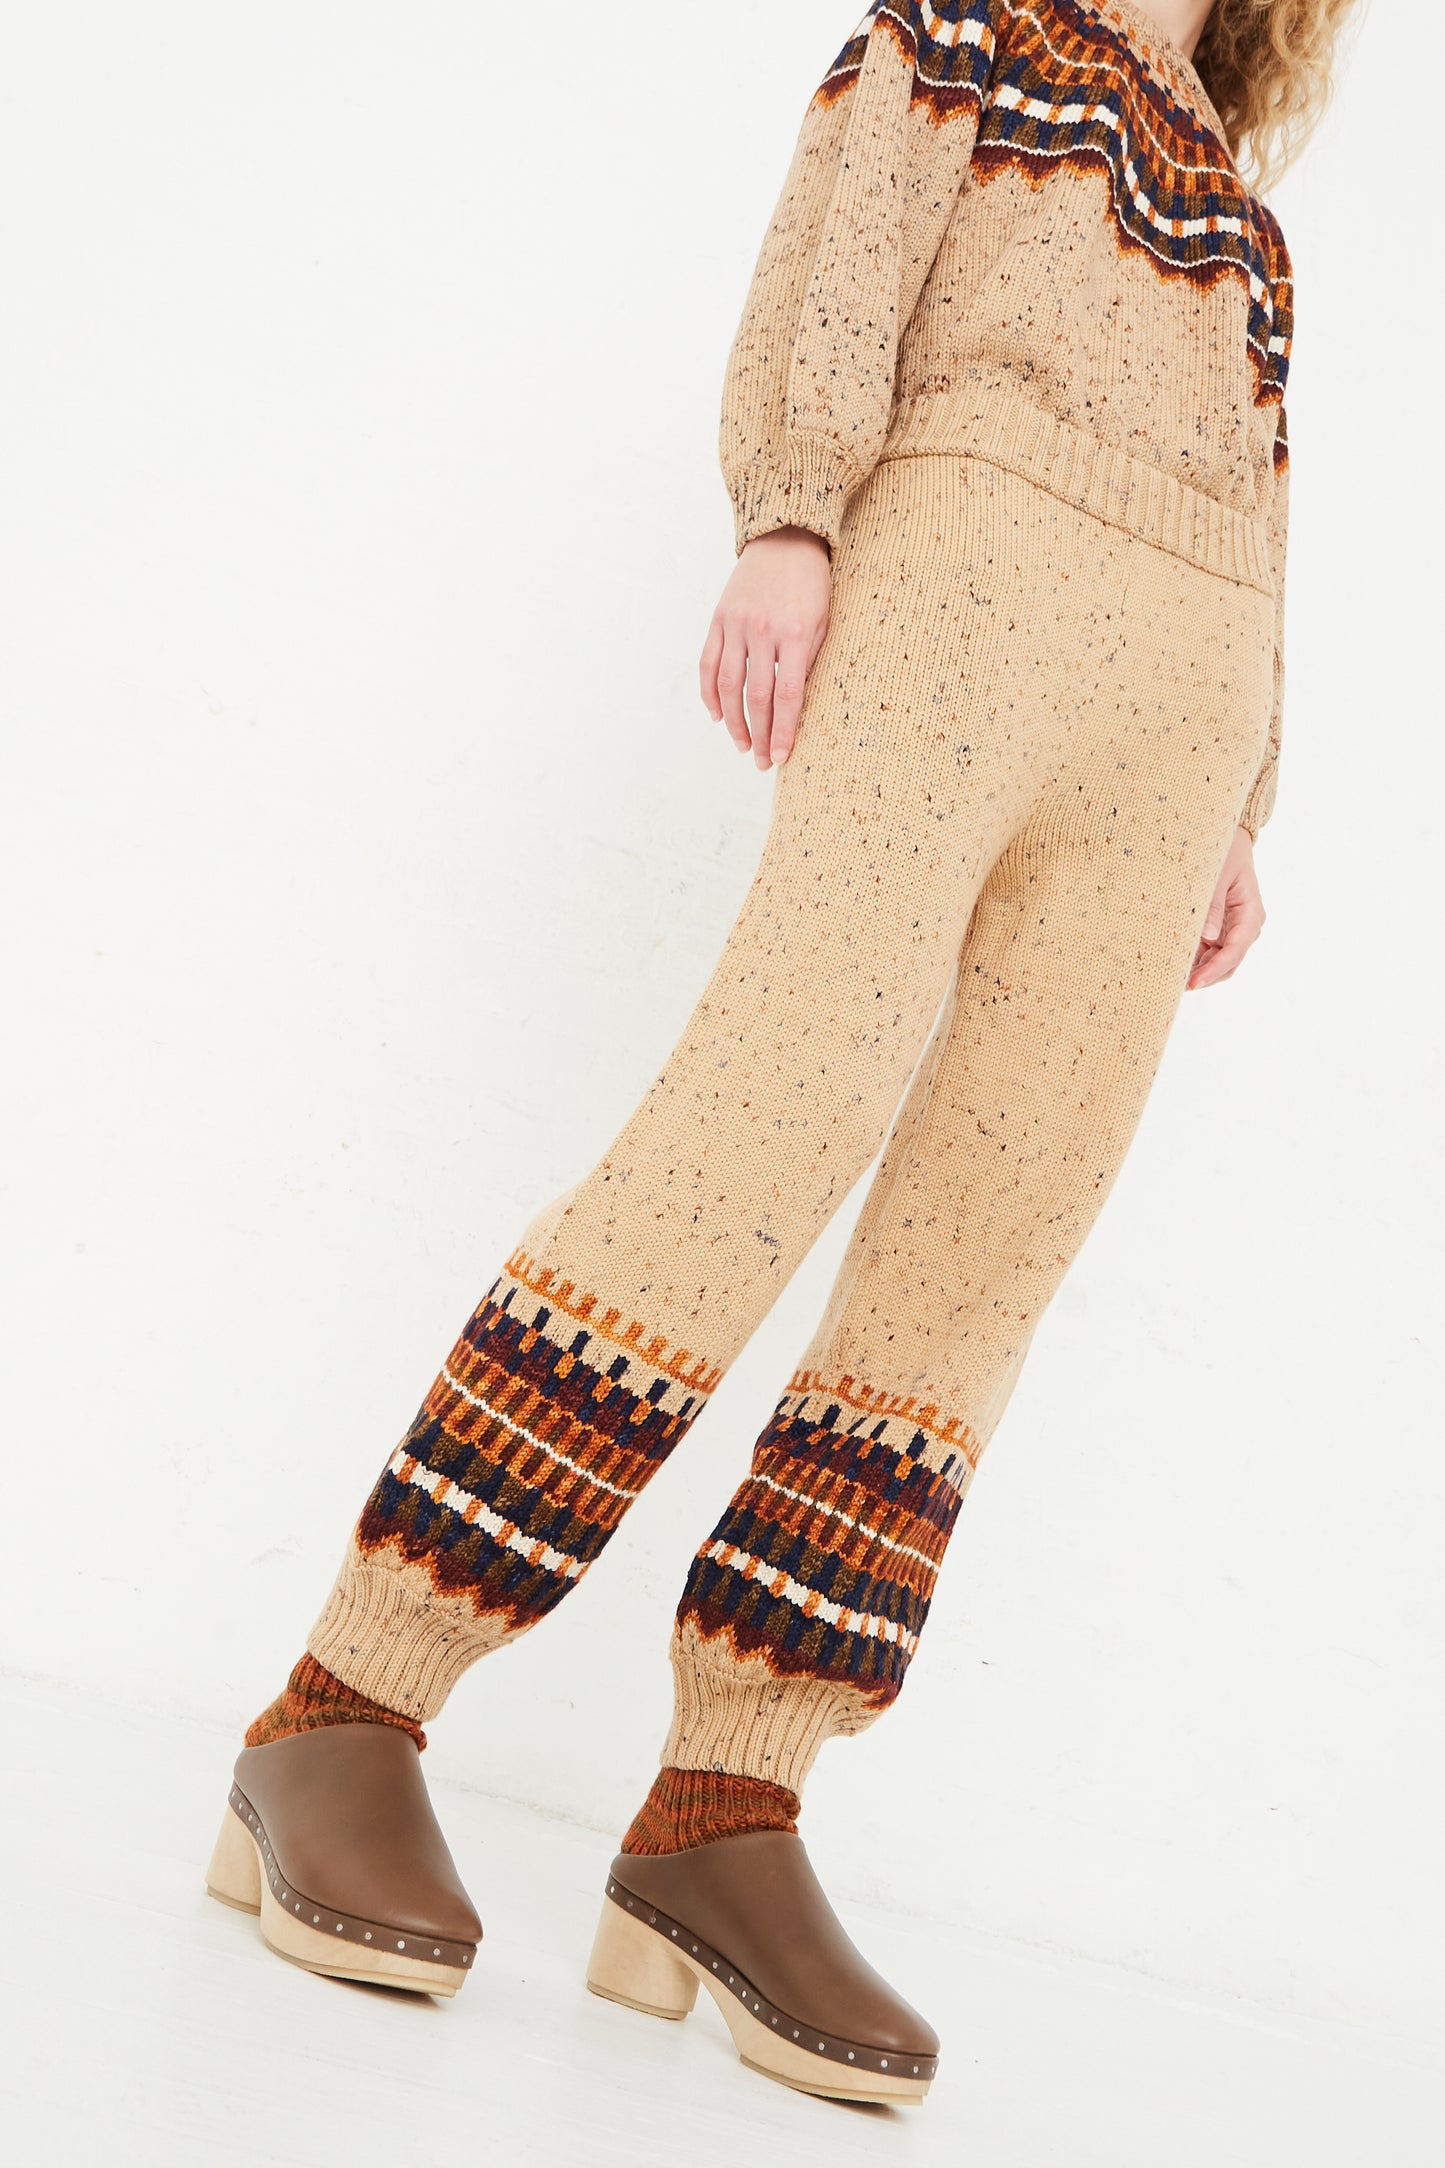 A model wearing a beige sweater and brown boots with the Fair Isle Warm-Up Pant in Seed Confetti from Misha & Puff.